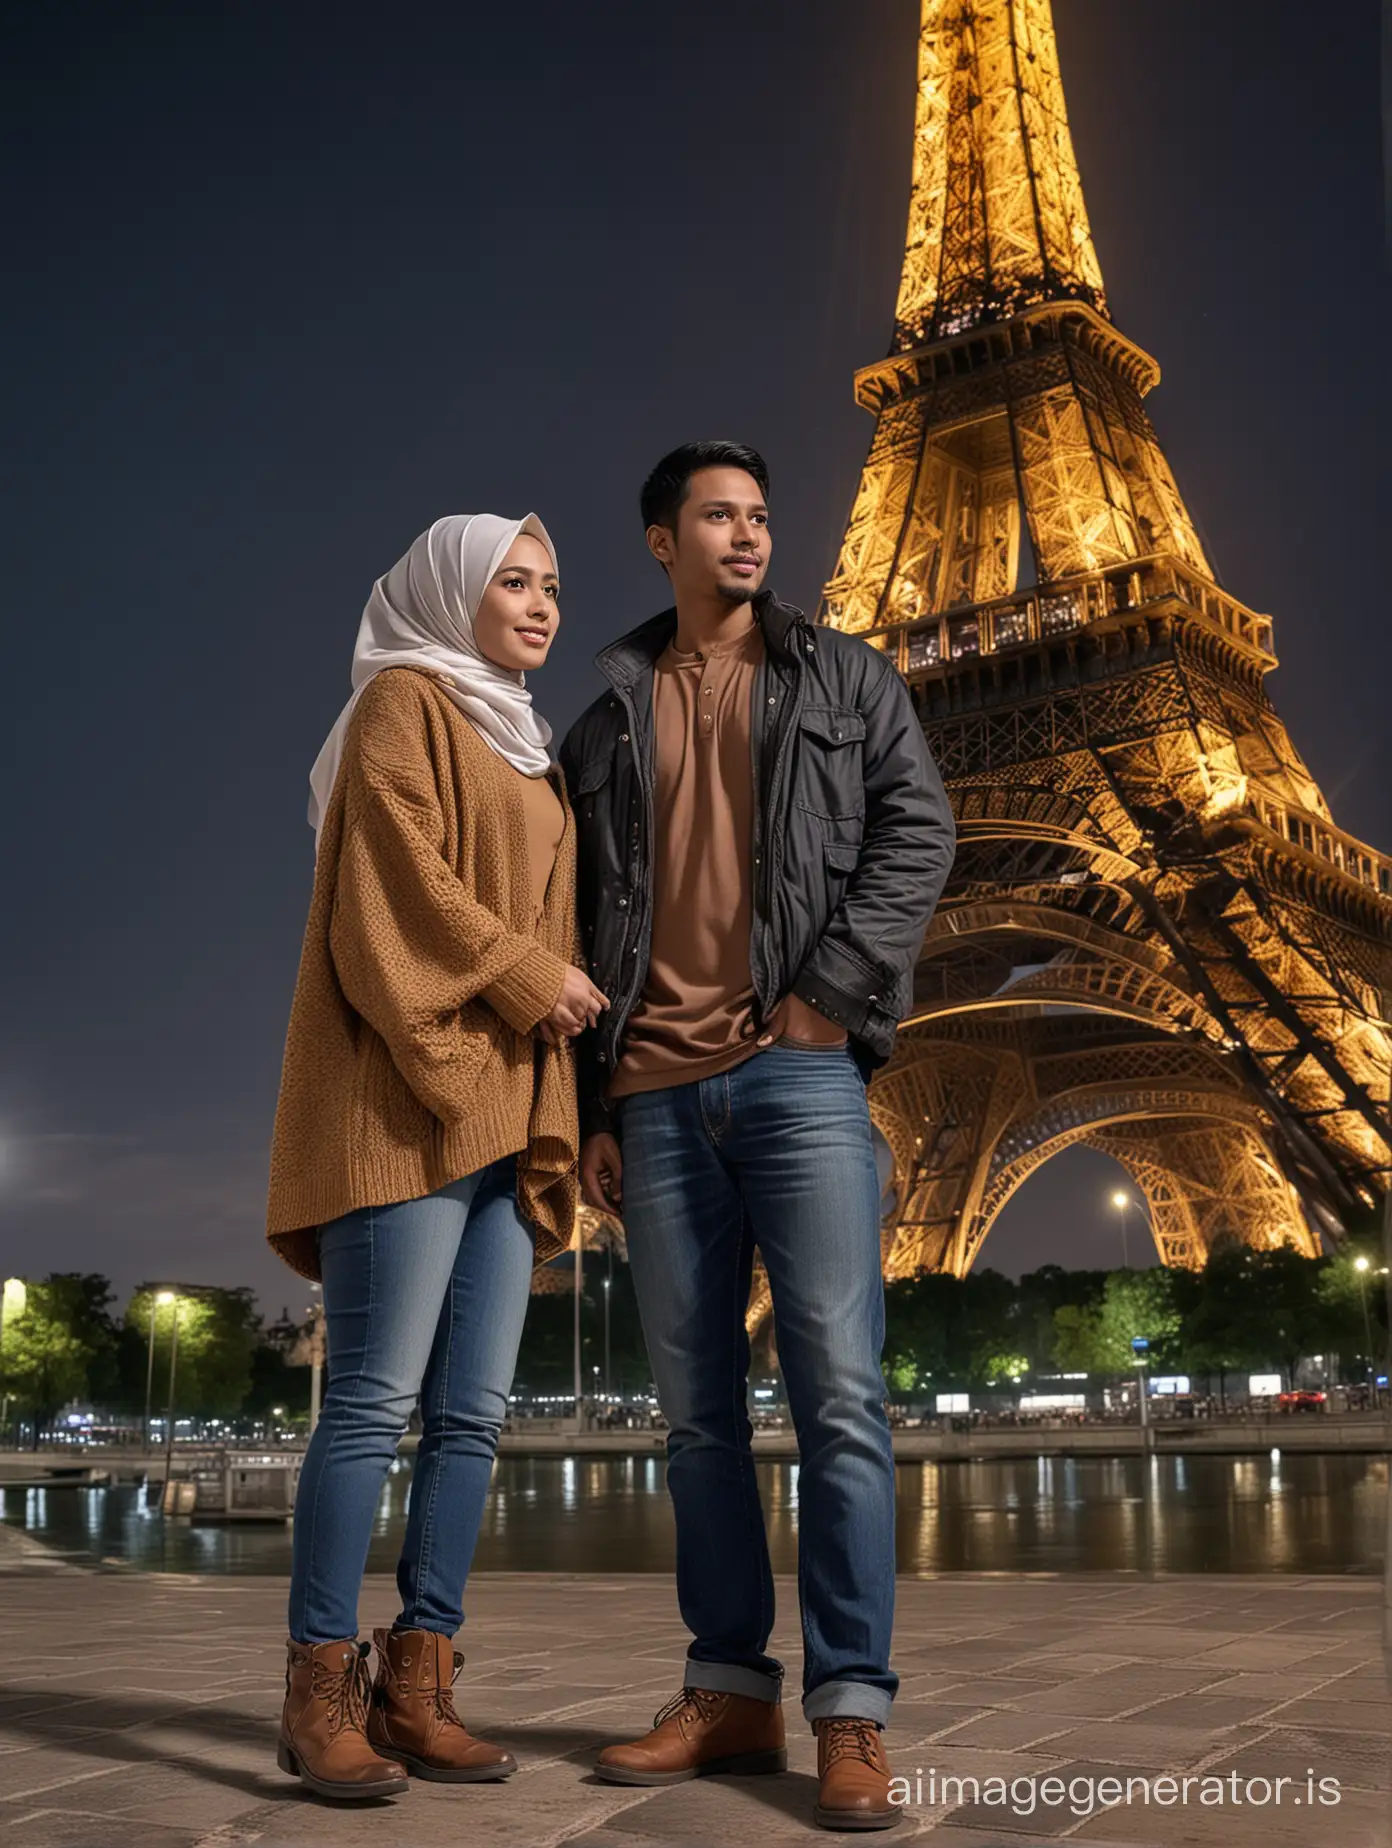 Indonesian-Couple-in-Hijab-and-Sweater-Standing-Under-Eiffel-Tower-at-Night-UltraHD-HDR-Photography